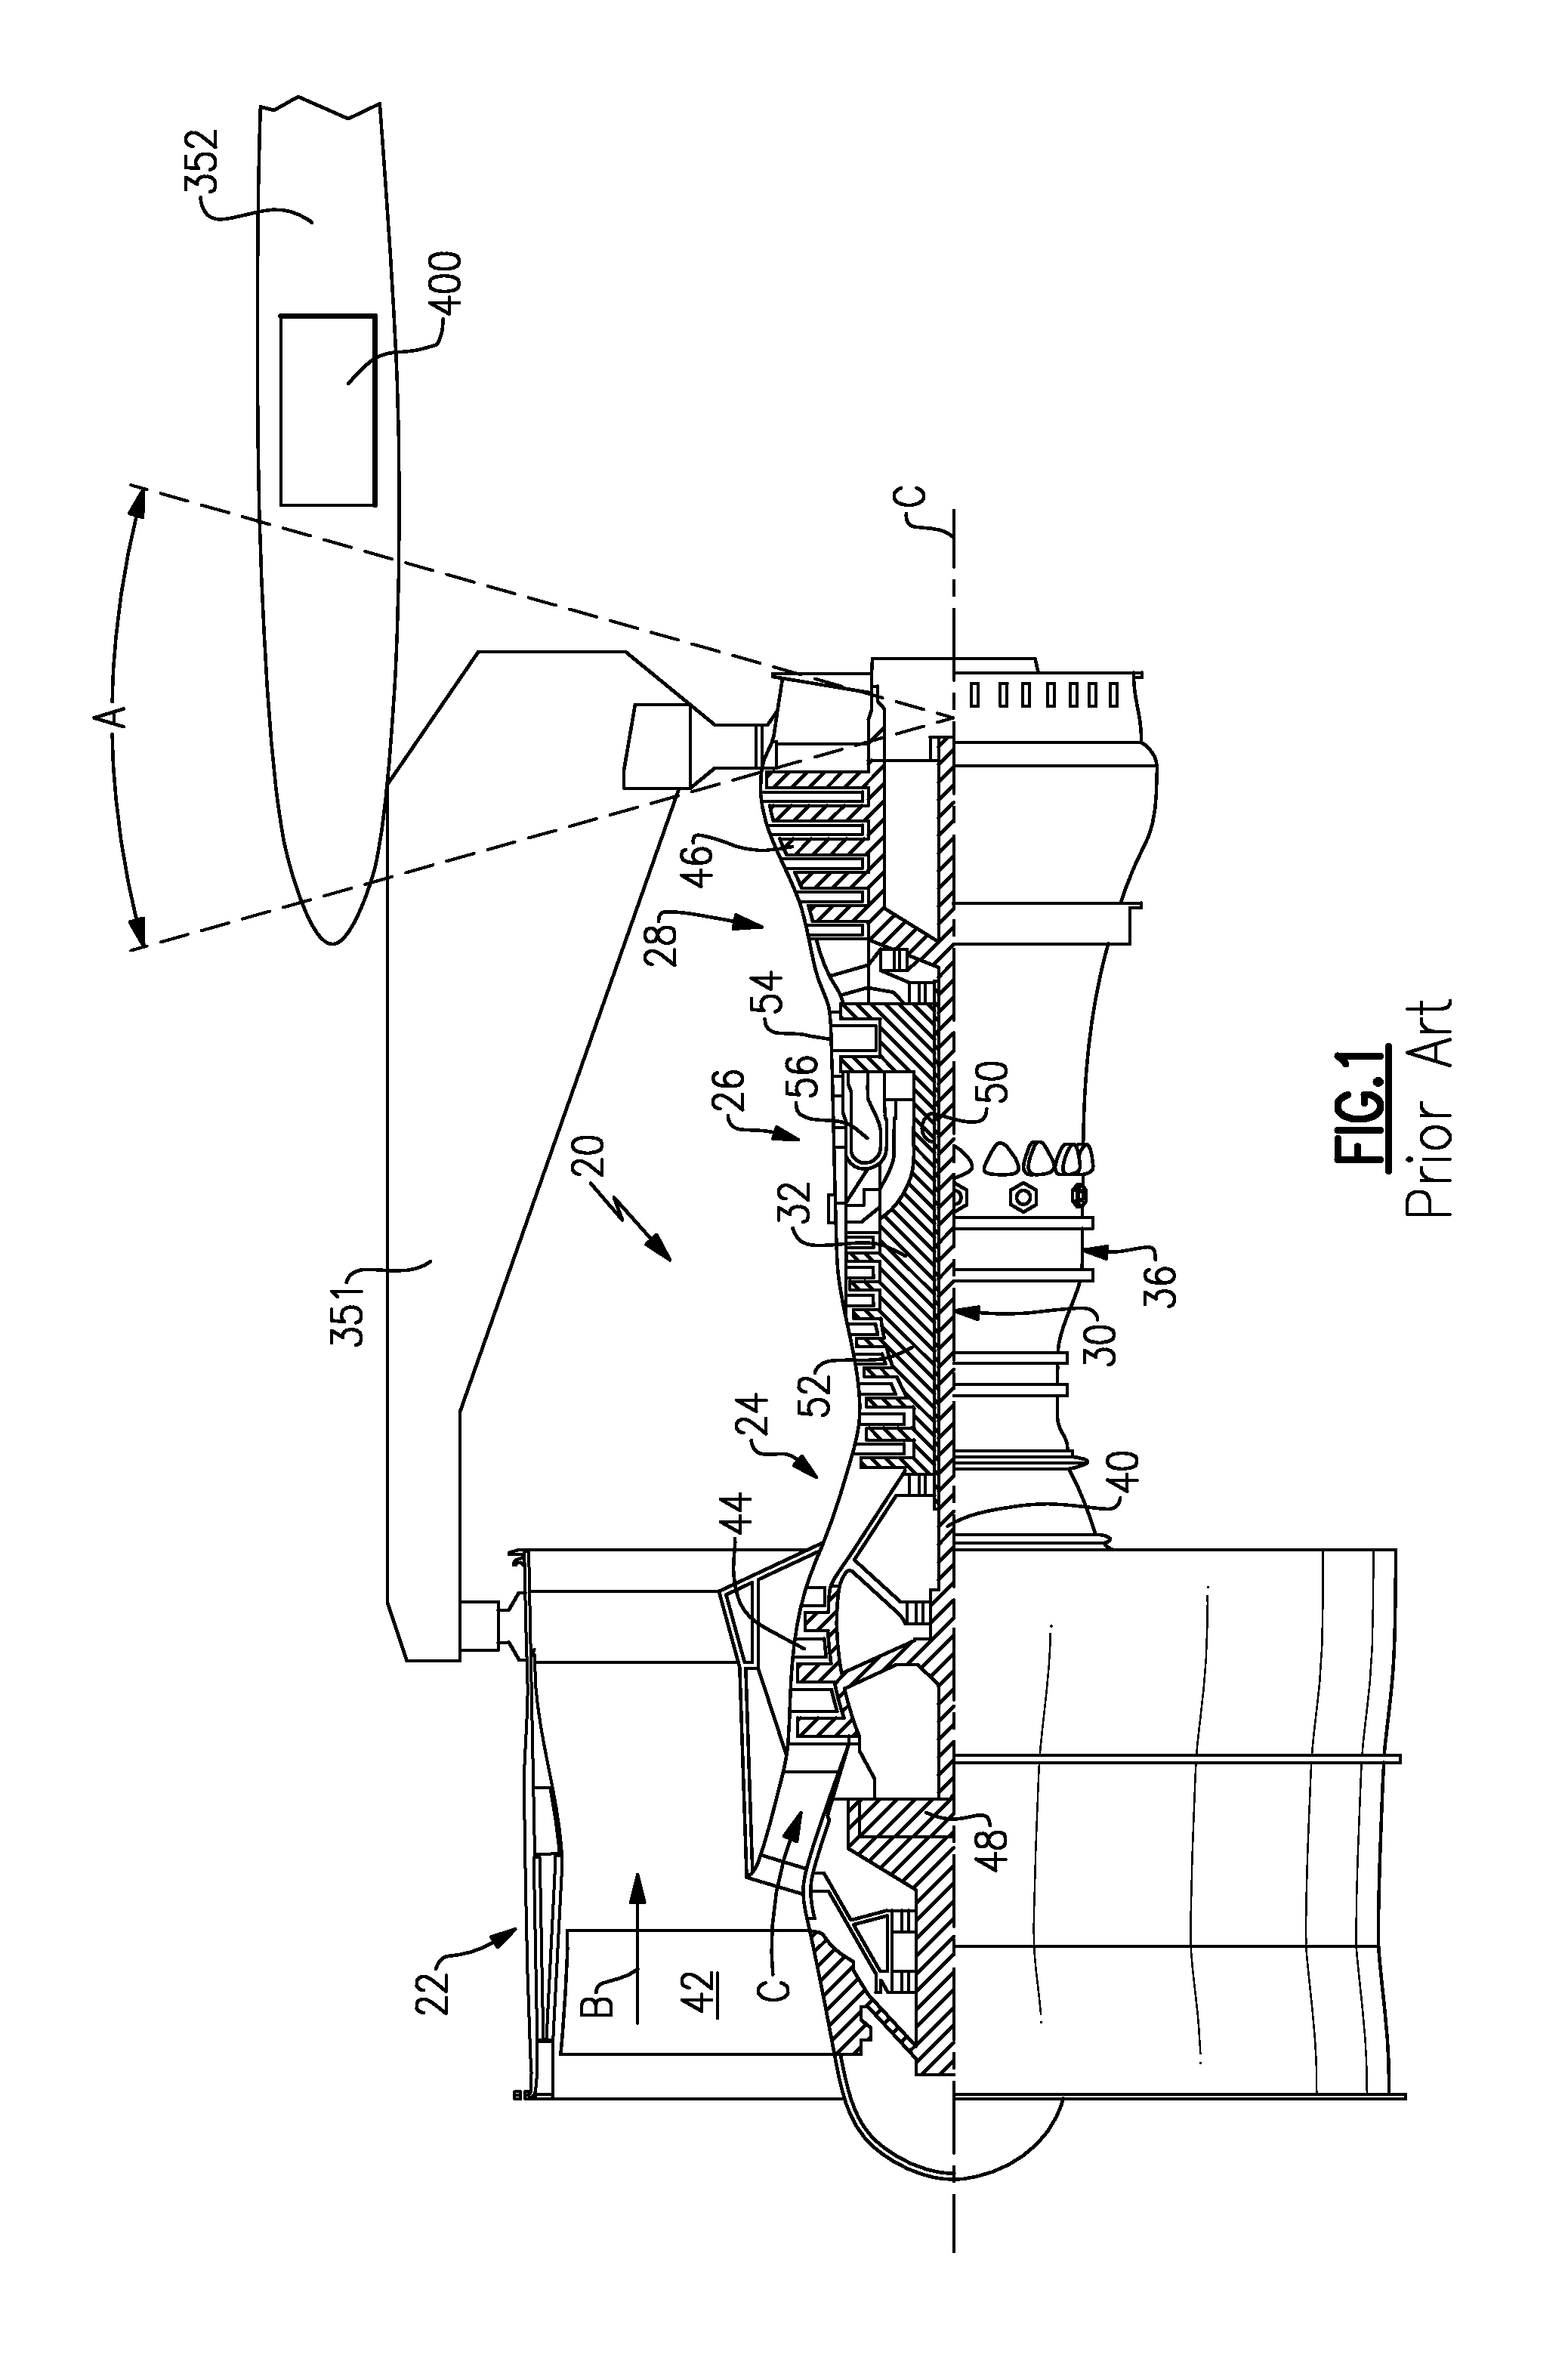 Gas turbine engine with separate core and propulsion unit